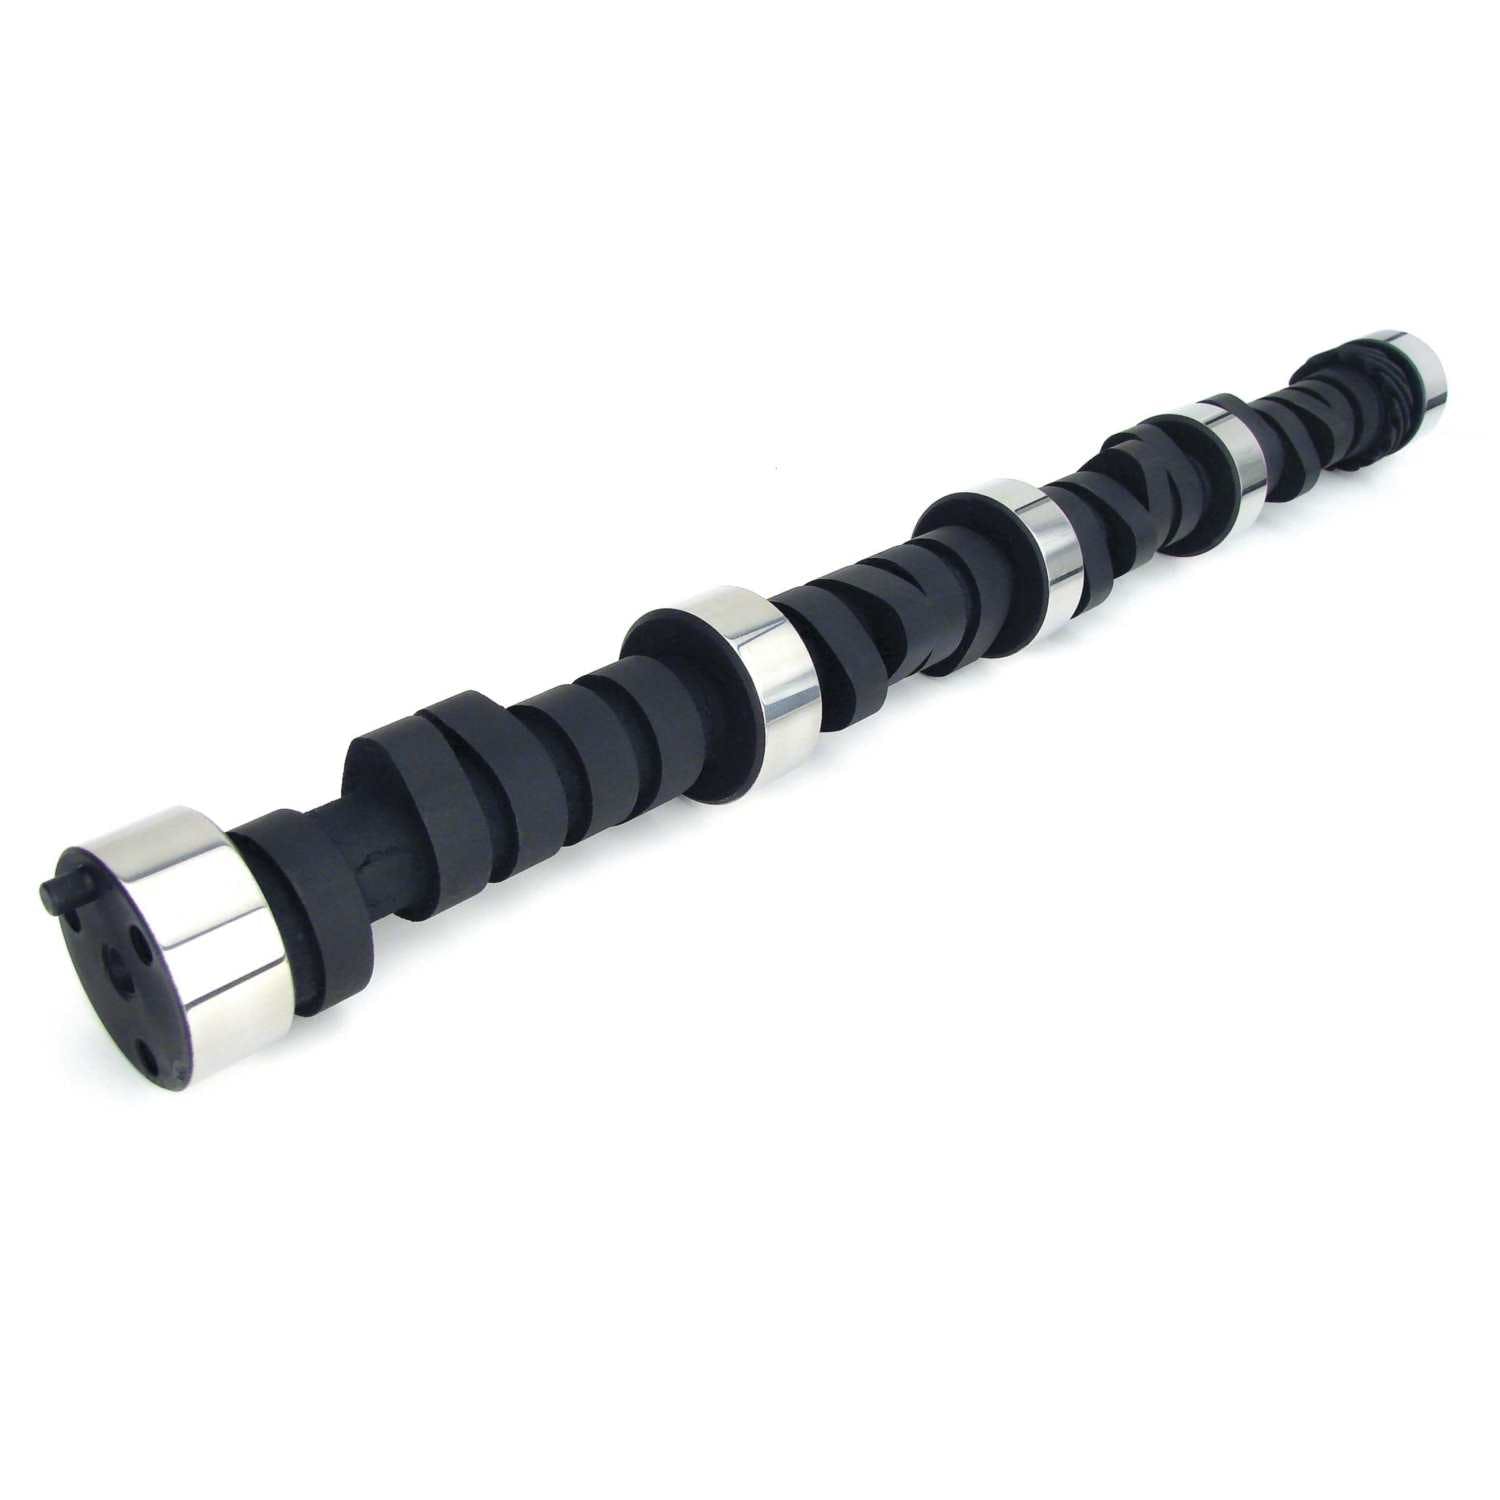 Competition Cams 11-239-3 Xtreme 4 X 4 Camshaft